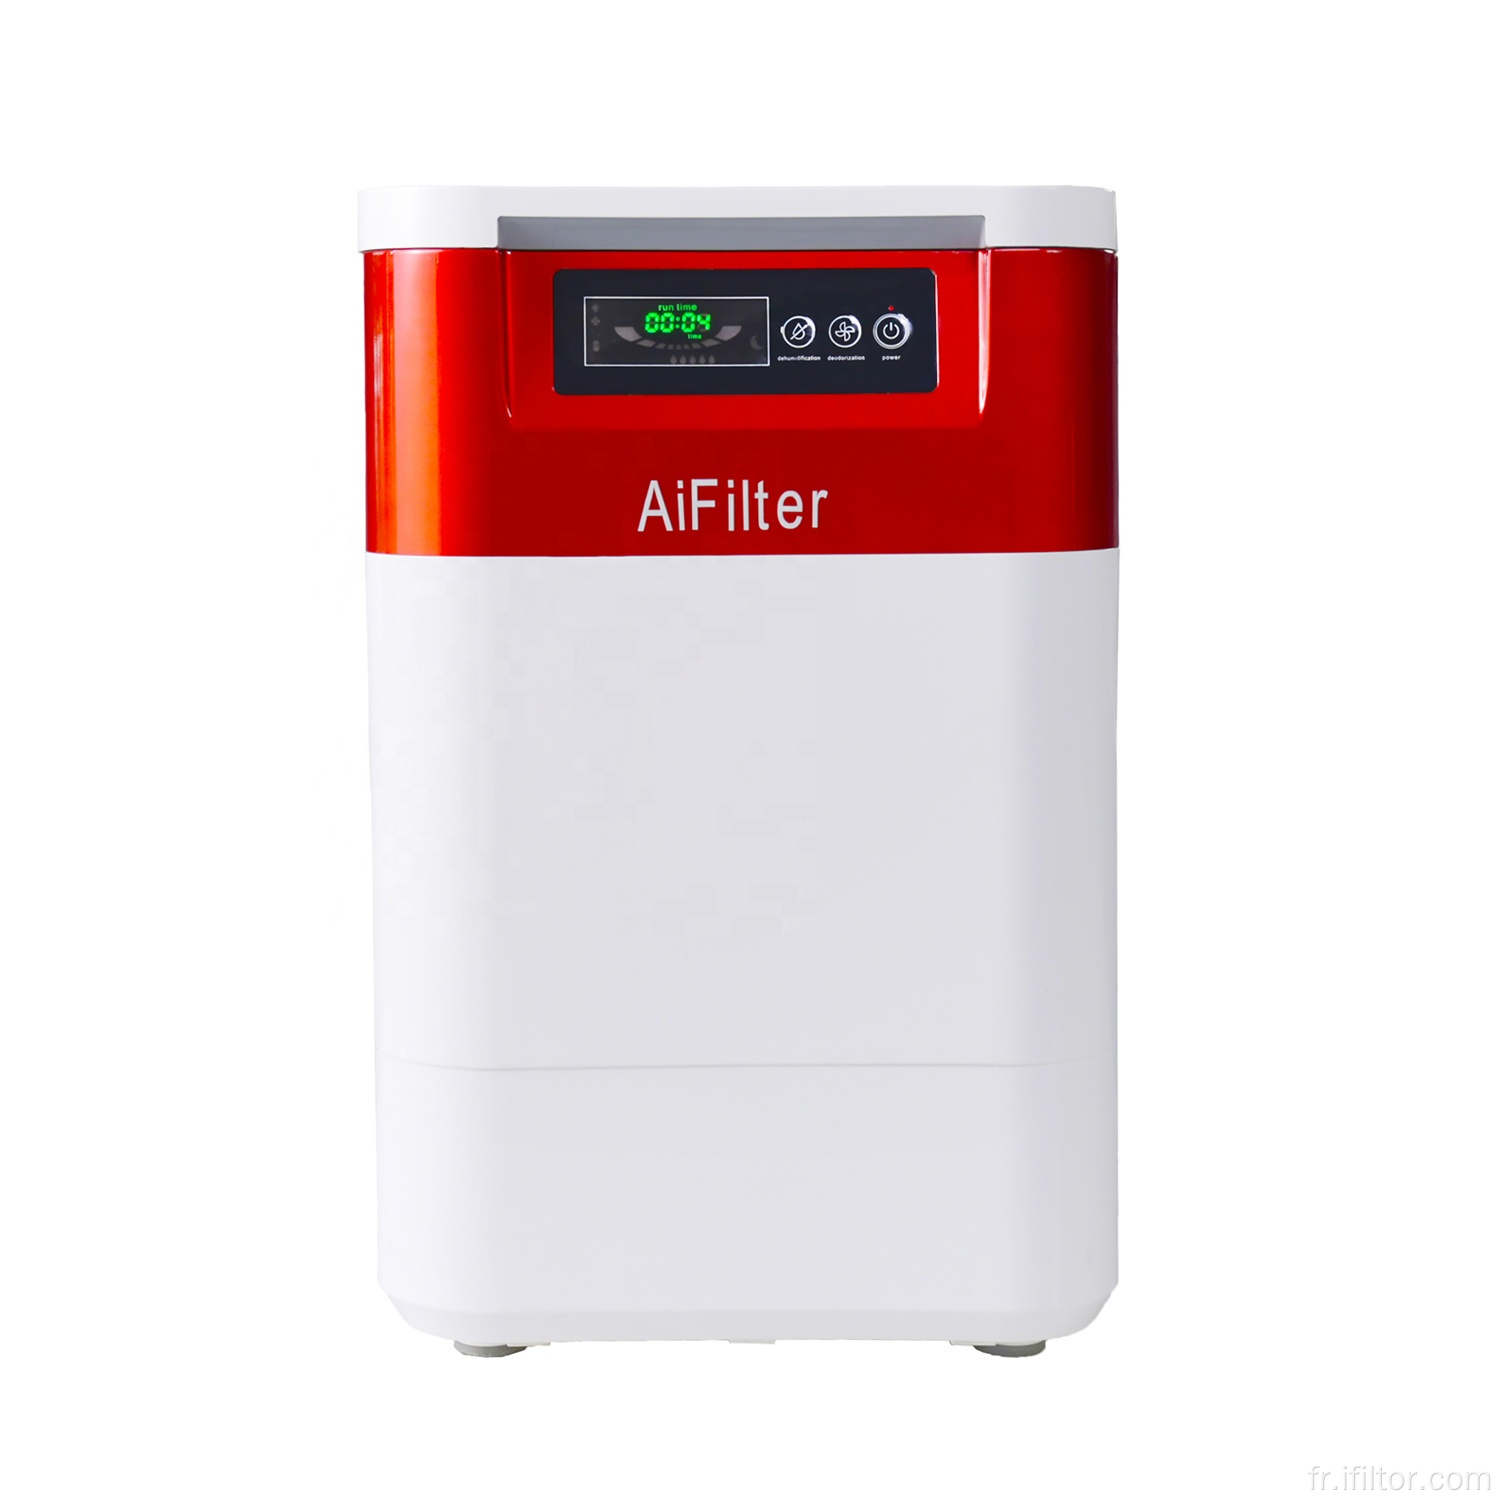 Aifilter Automatic Kitchen Food Waste Disposer